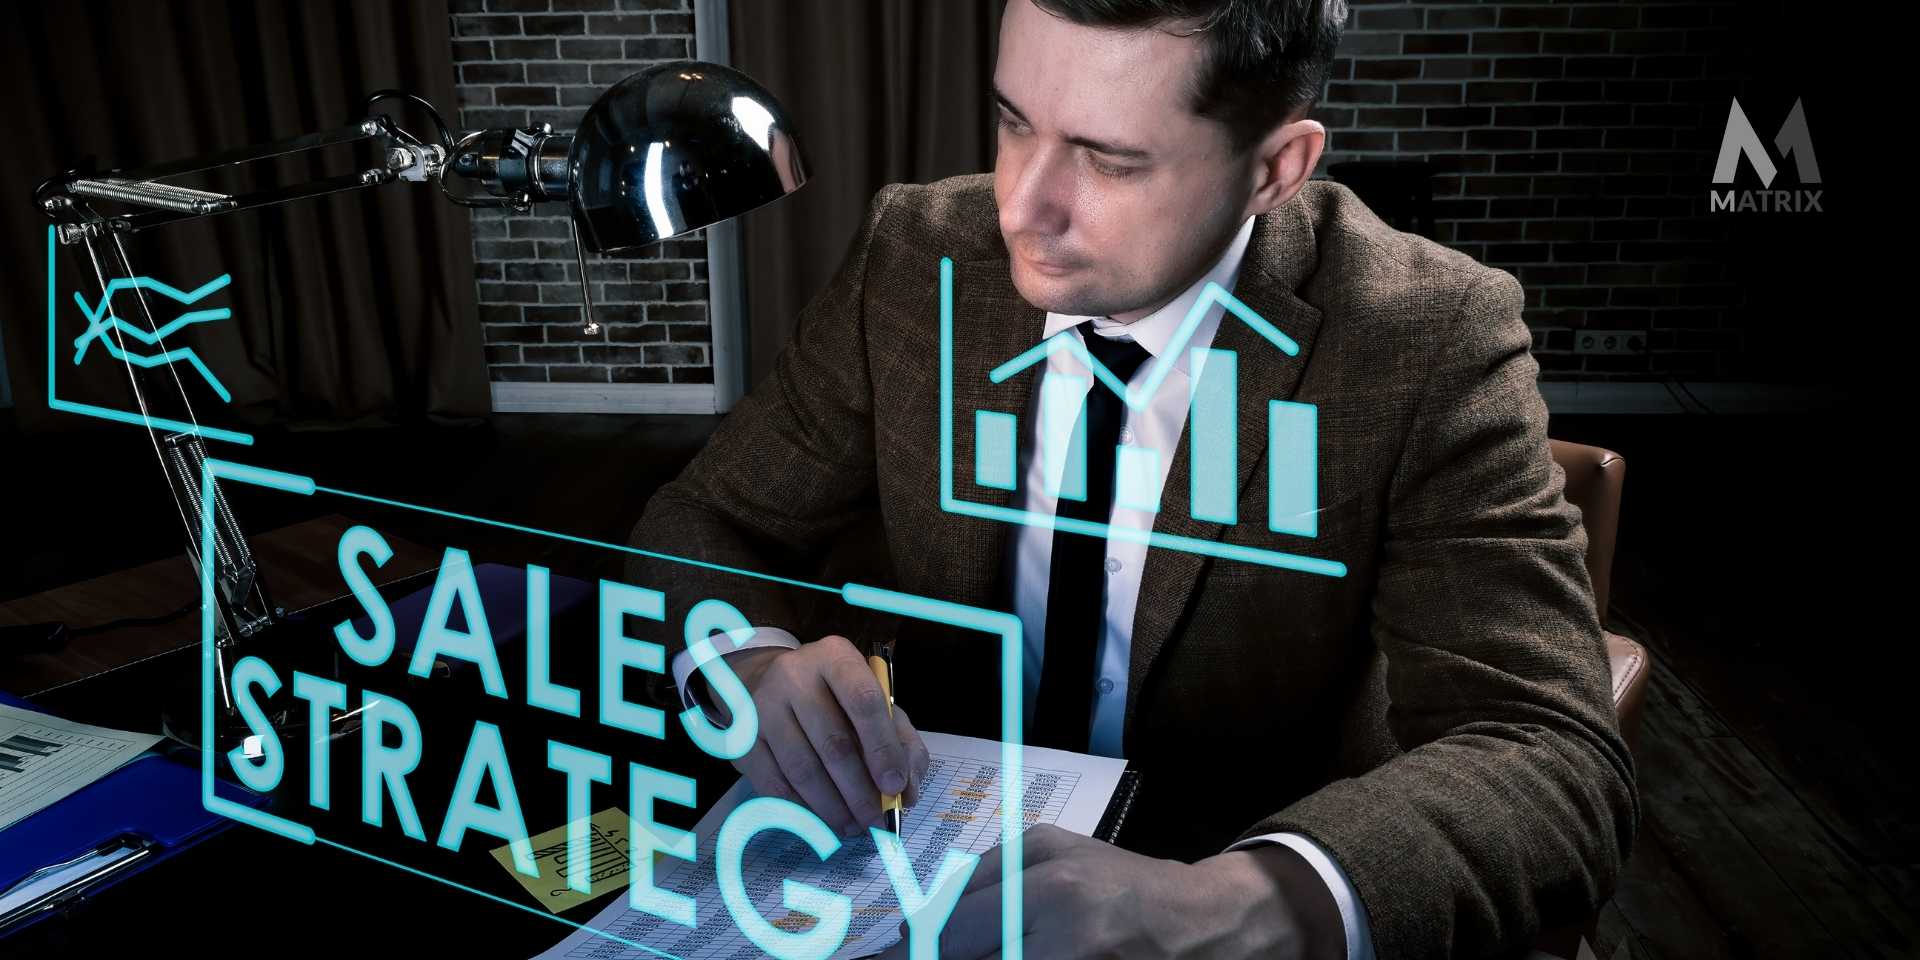 What sales strategy